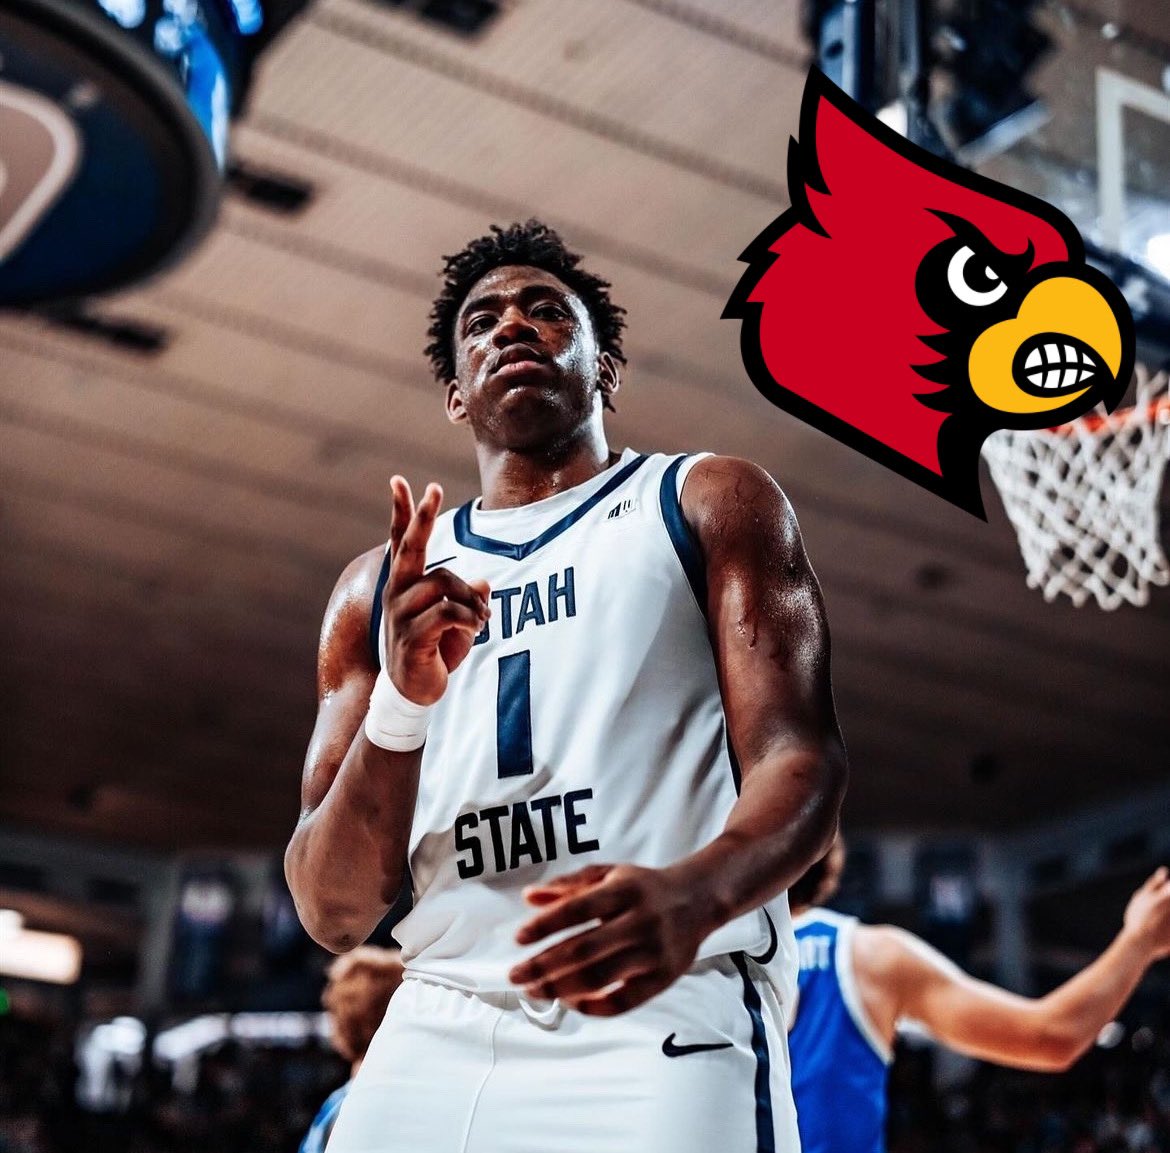 Utah State transfer and Mountain West POTY, Great Osobor is locked in for an Official Visit to Louisville from May 1st-3rd! The 6-8 forward averaged 17.7 points and 9.0 rebounds! This would be a massive get for PK! #GoCards‼️#ReviVILLE